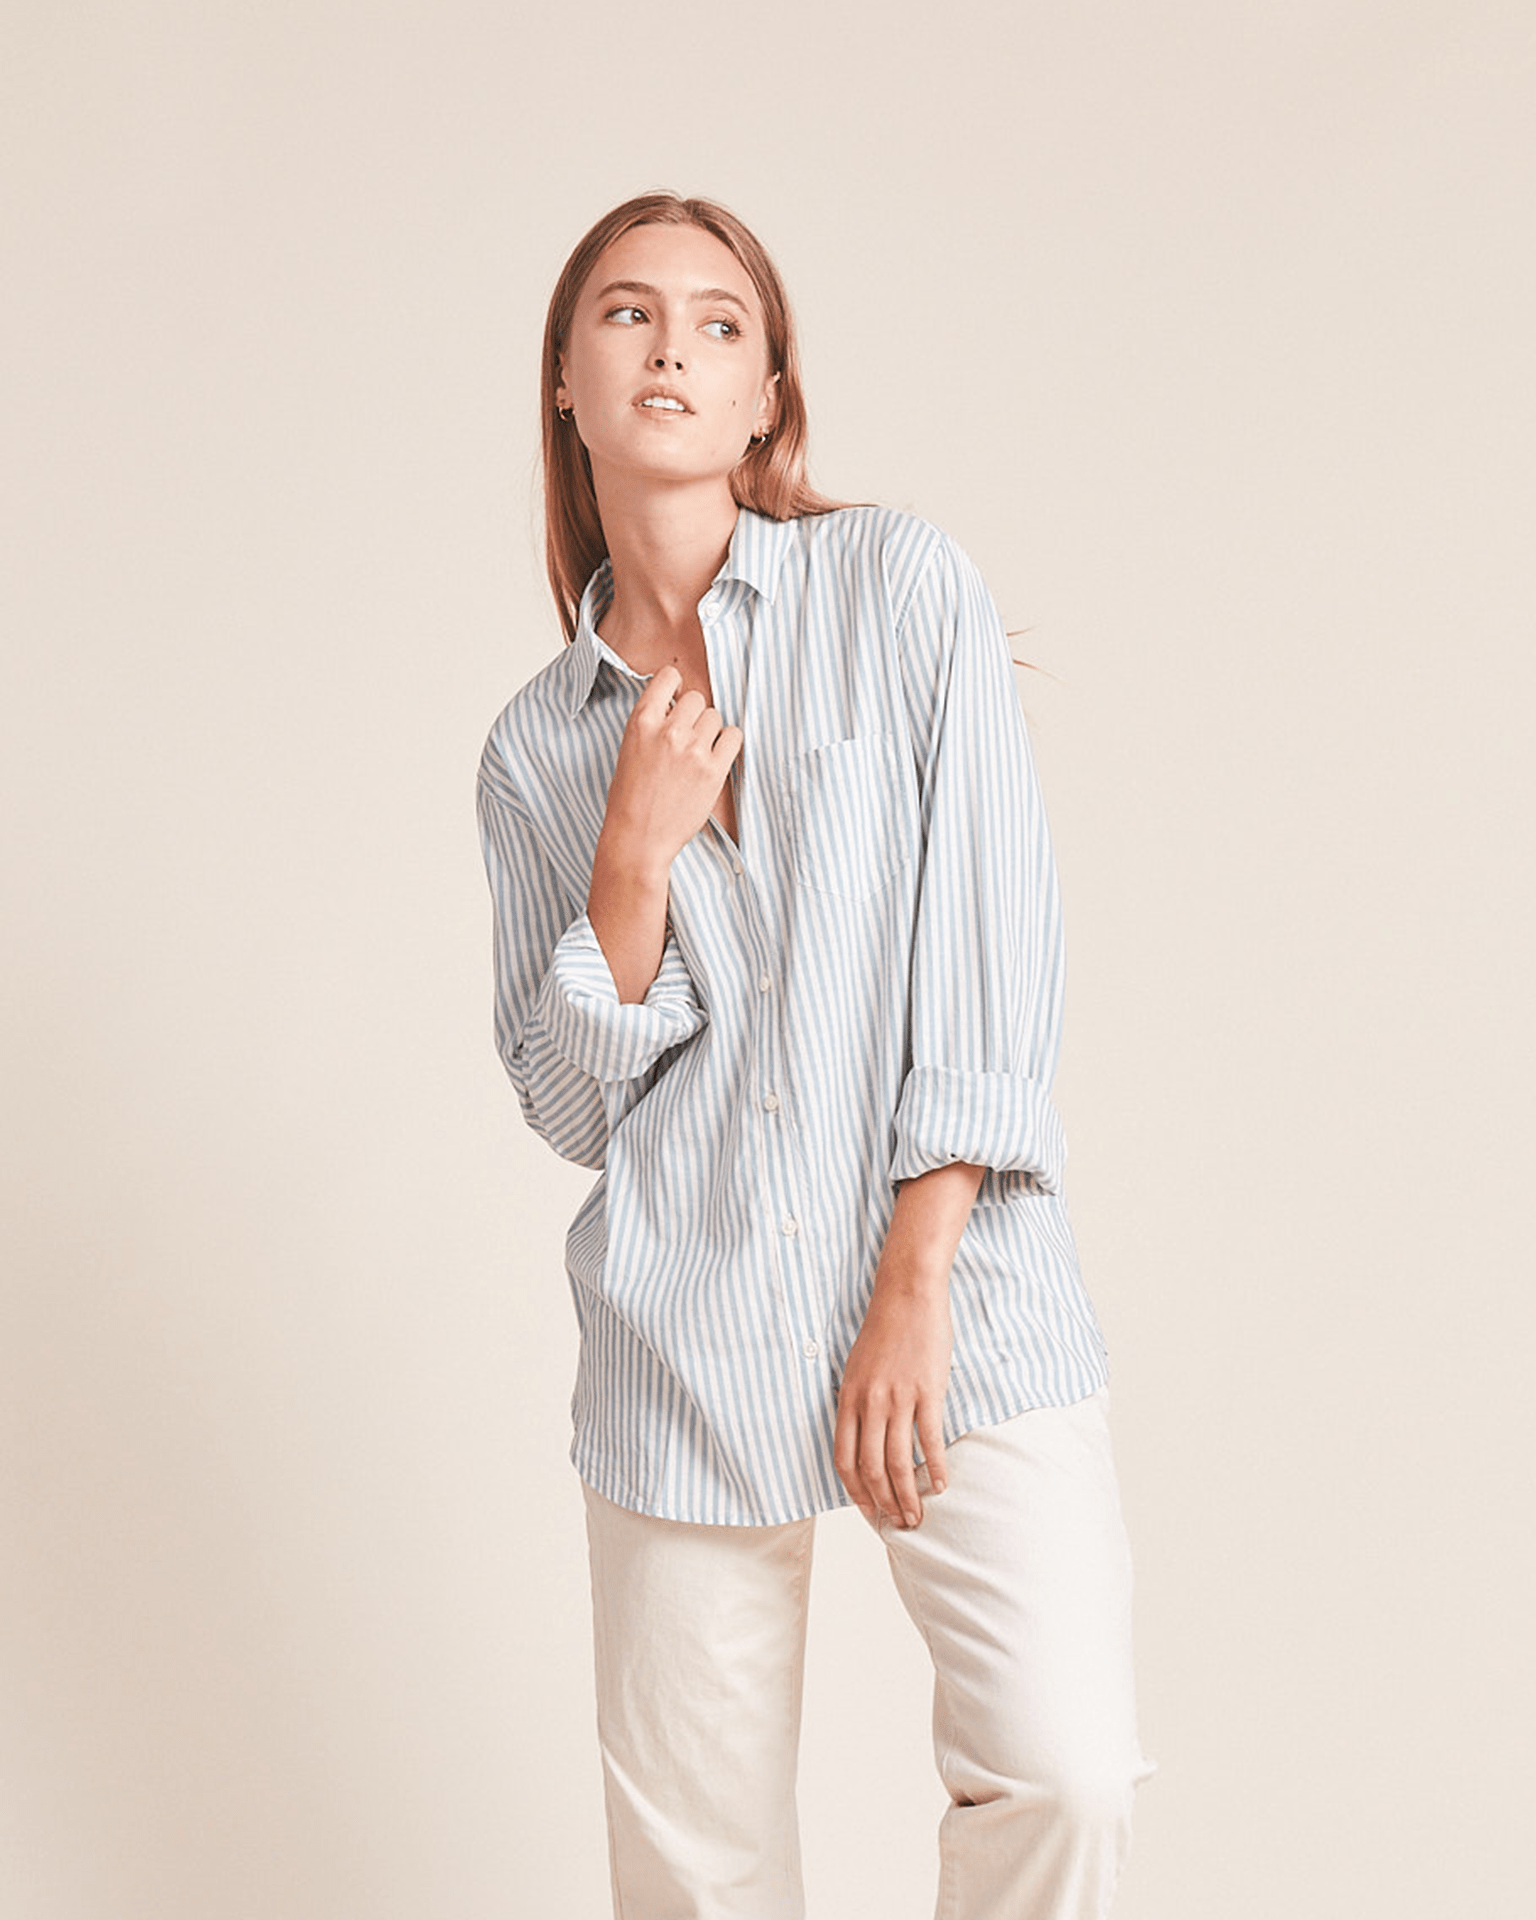 Black Long Sleeve Top - Button-Up Top - Crinkle Woven Top - Lulus